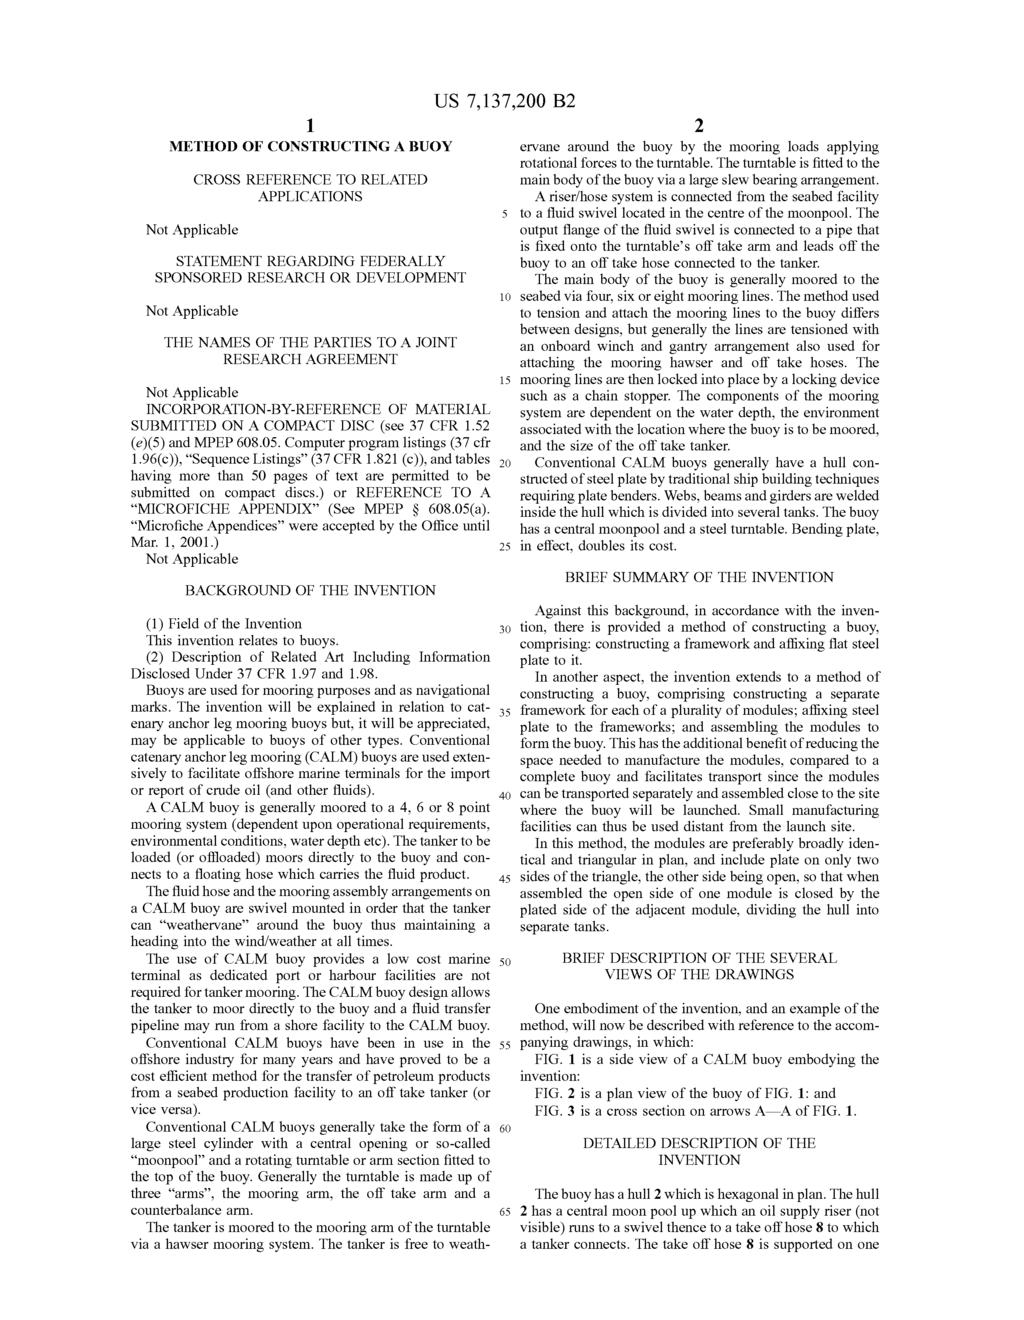 1. METHOD OF CONSTRUCTING A BUOY CROSS REFERENCE TO RELATED APPLICATIONS STATEMENT REGARDING FEDERALLY SPONSORED RESEARCH OR DEVELOPMENT THE NAMES OF THE PARTIES TO AJOINT RESEARCH AGREEMENT